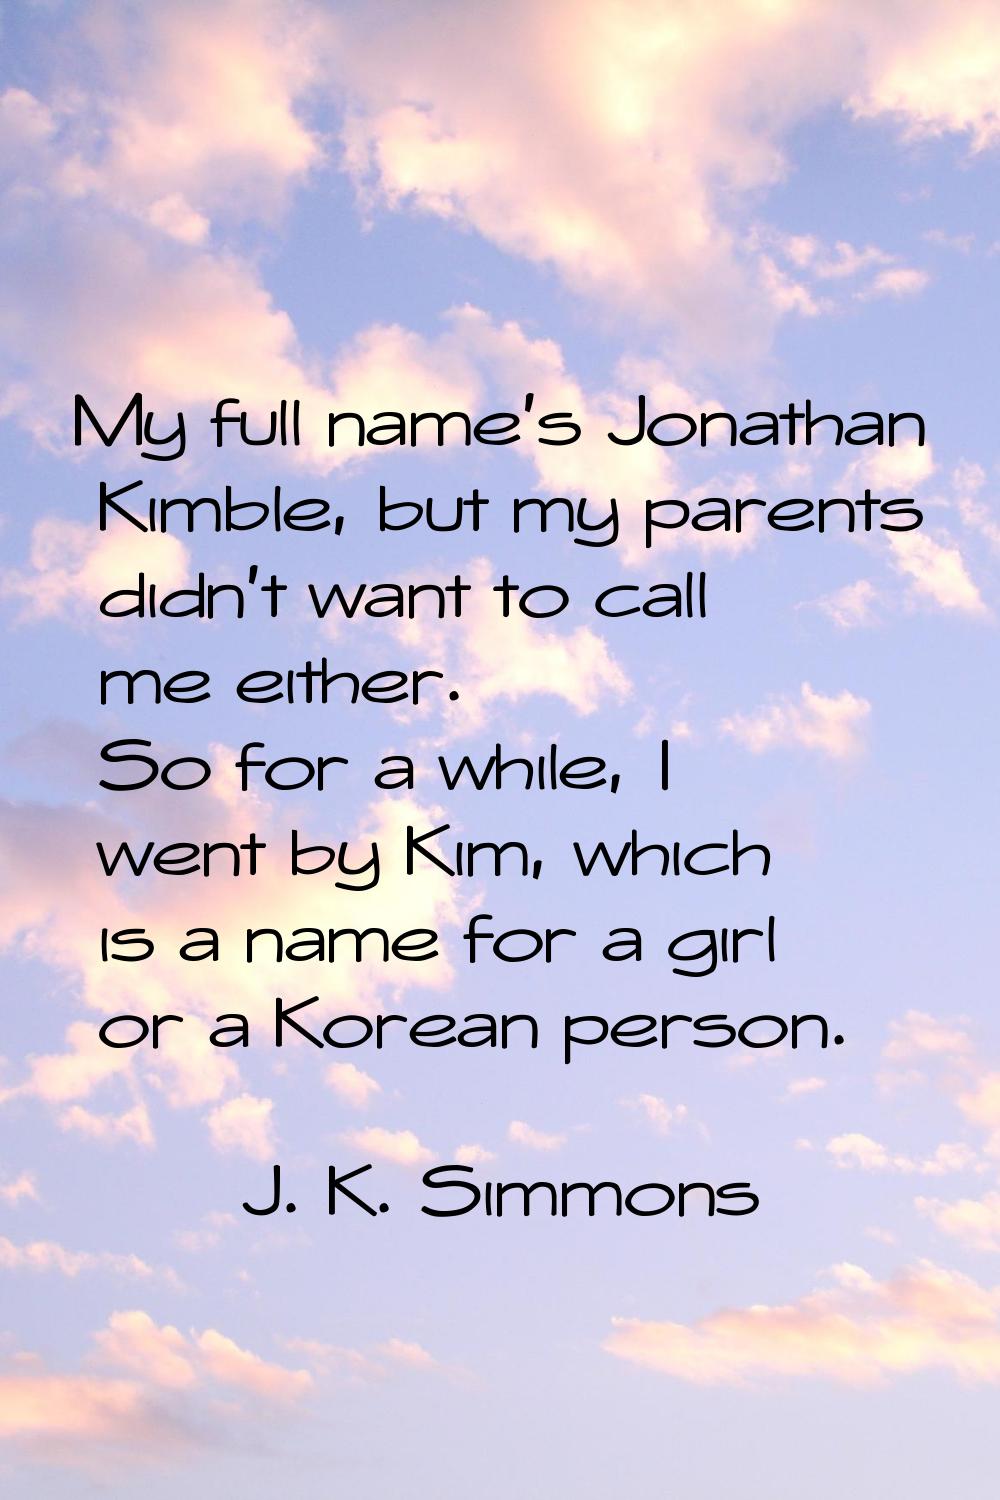 My full name's Jonathan Kimble, but my parents didn't want to call me either. So for a while, I wen